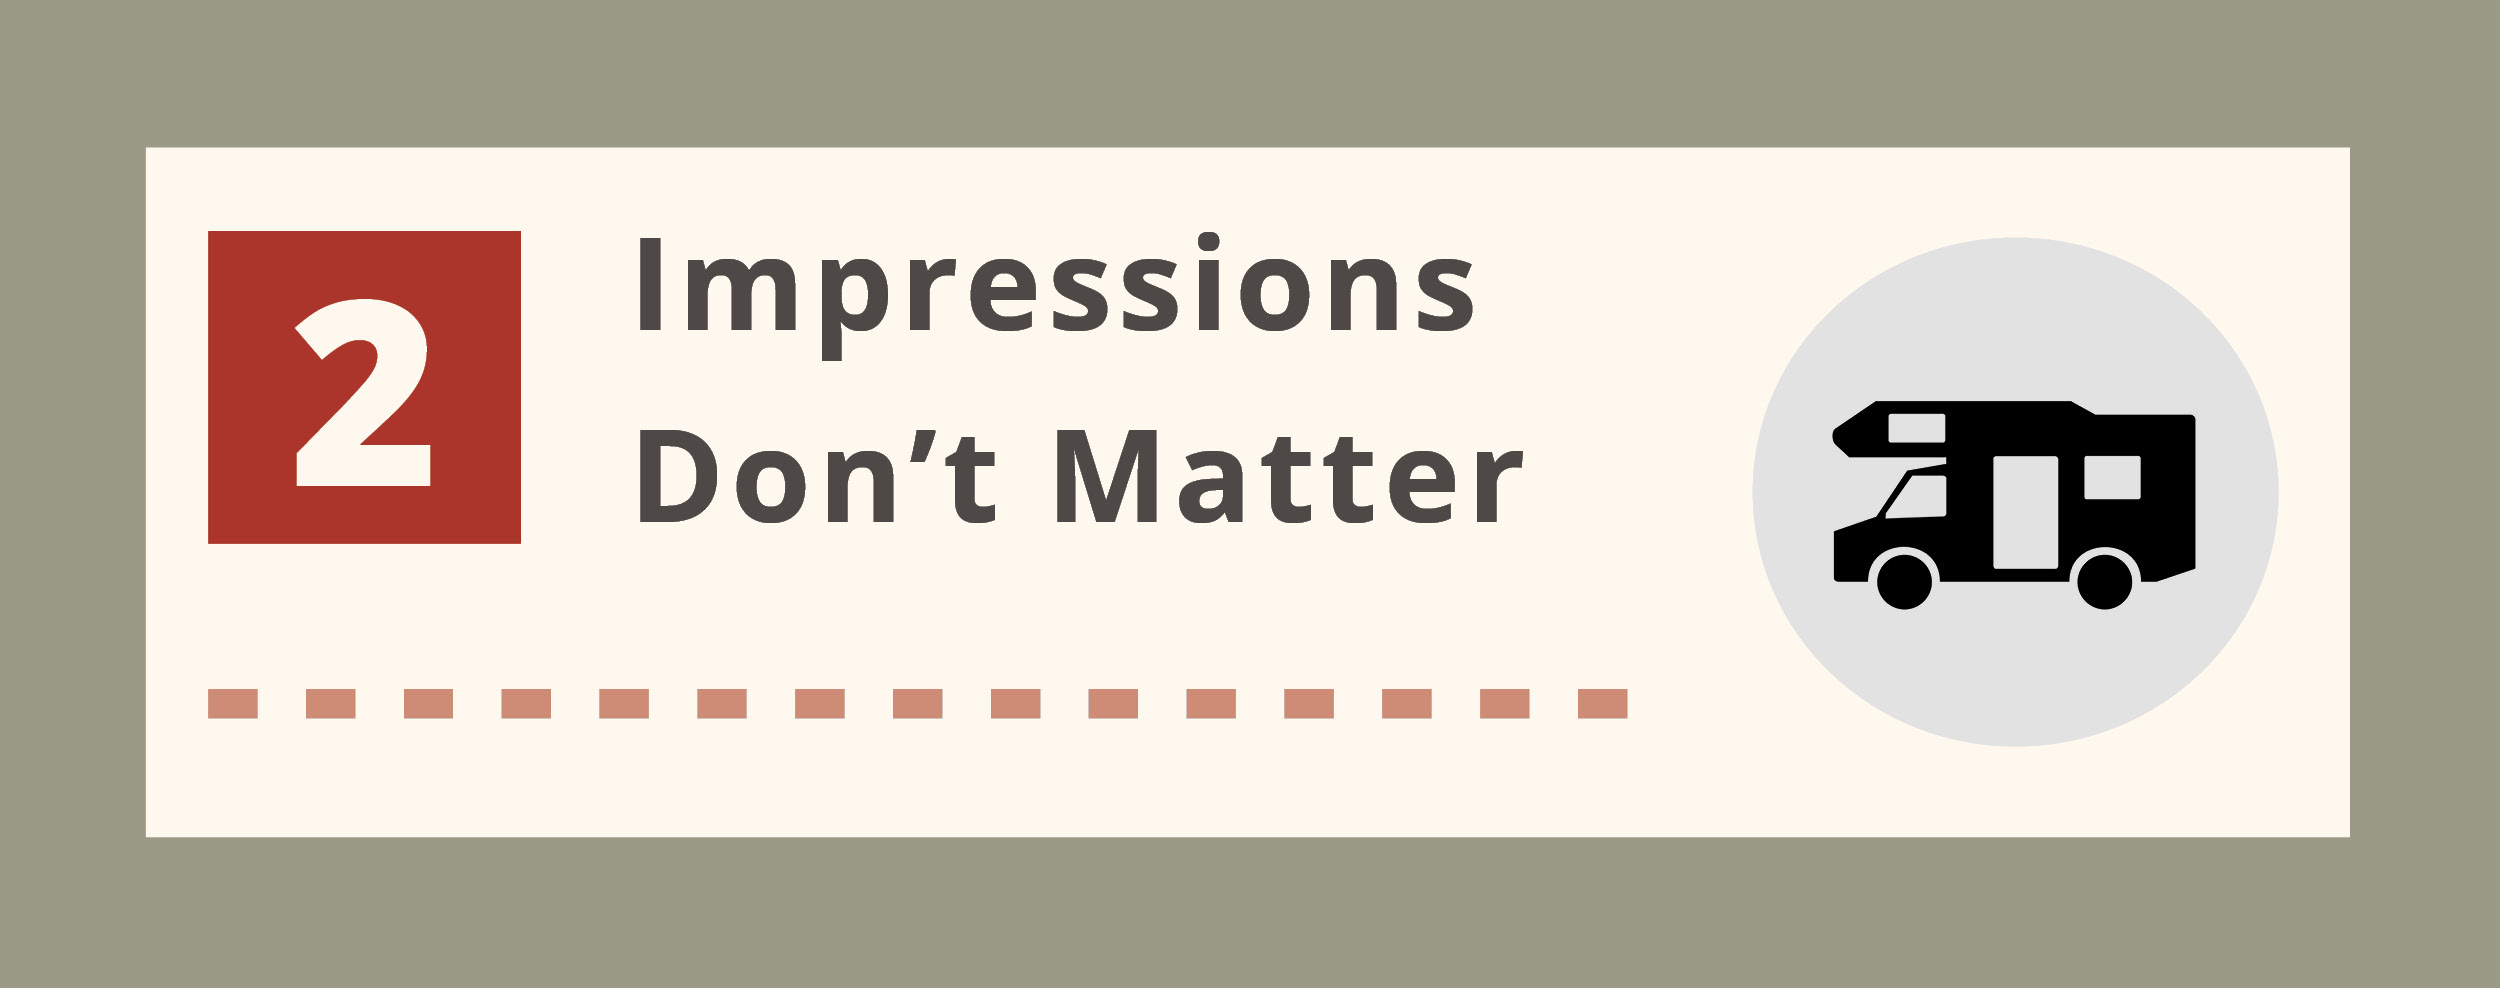 Impressions don't matter text